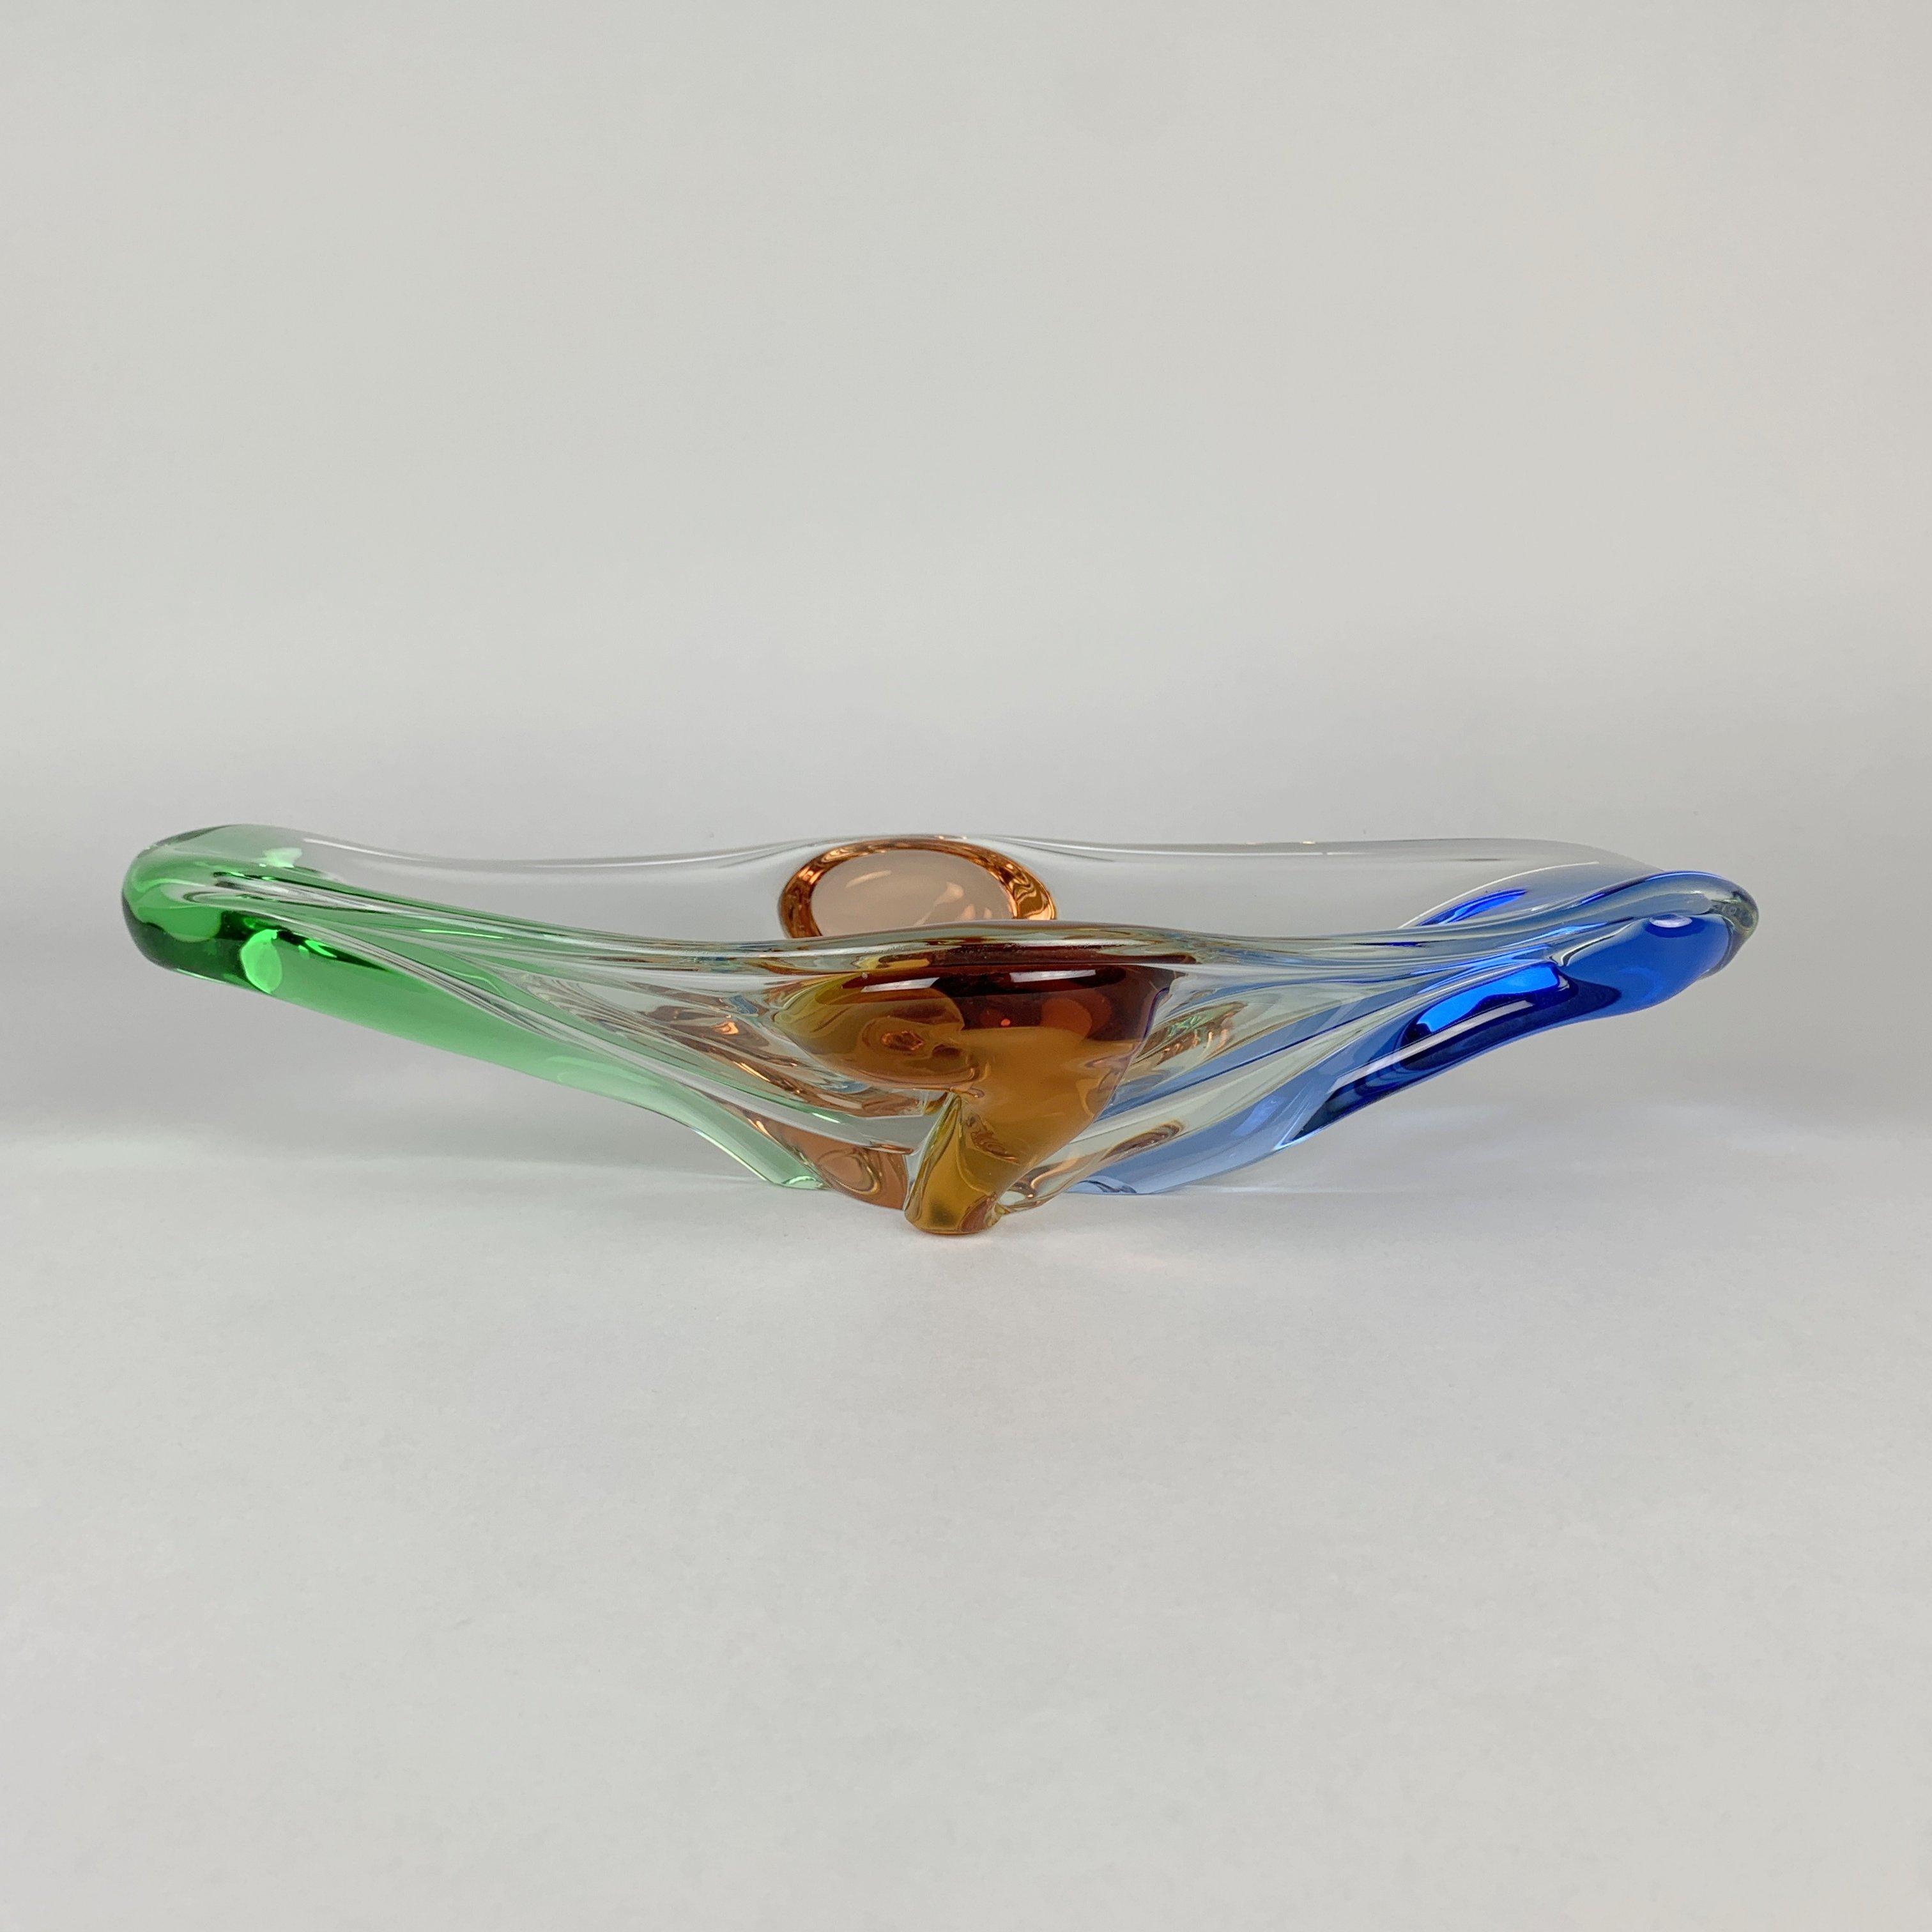 Gorgeous midcentury colored art glass bowl designed by Frantisek Zemek and produced by Mstisov Glassworks, Czechoslovakia in 1950s. The piece is from the Rhapsody collection.